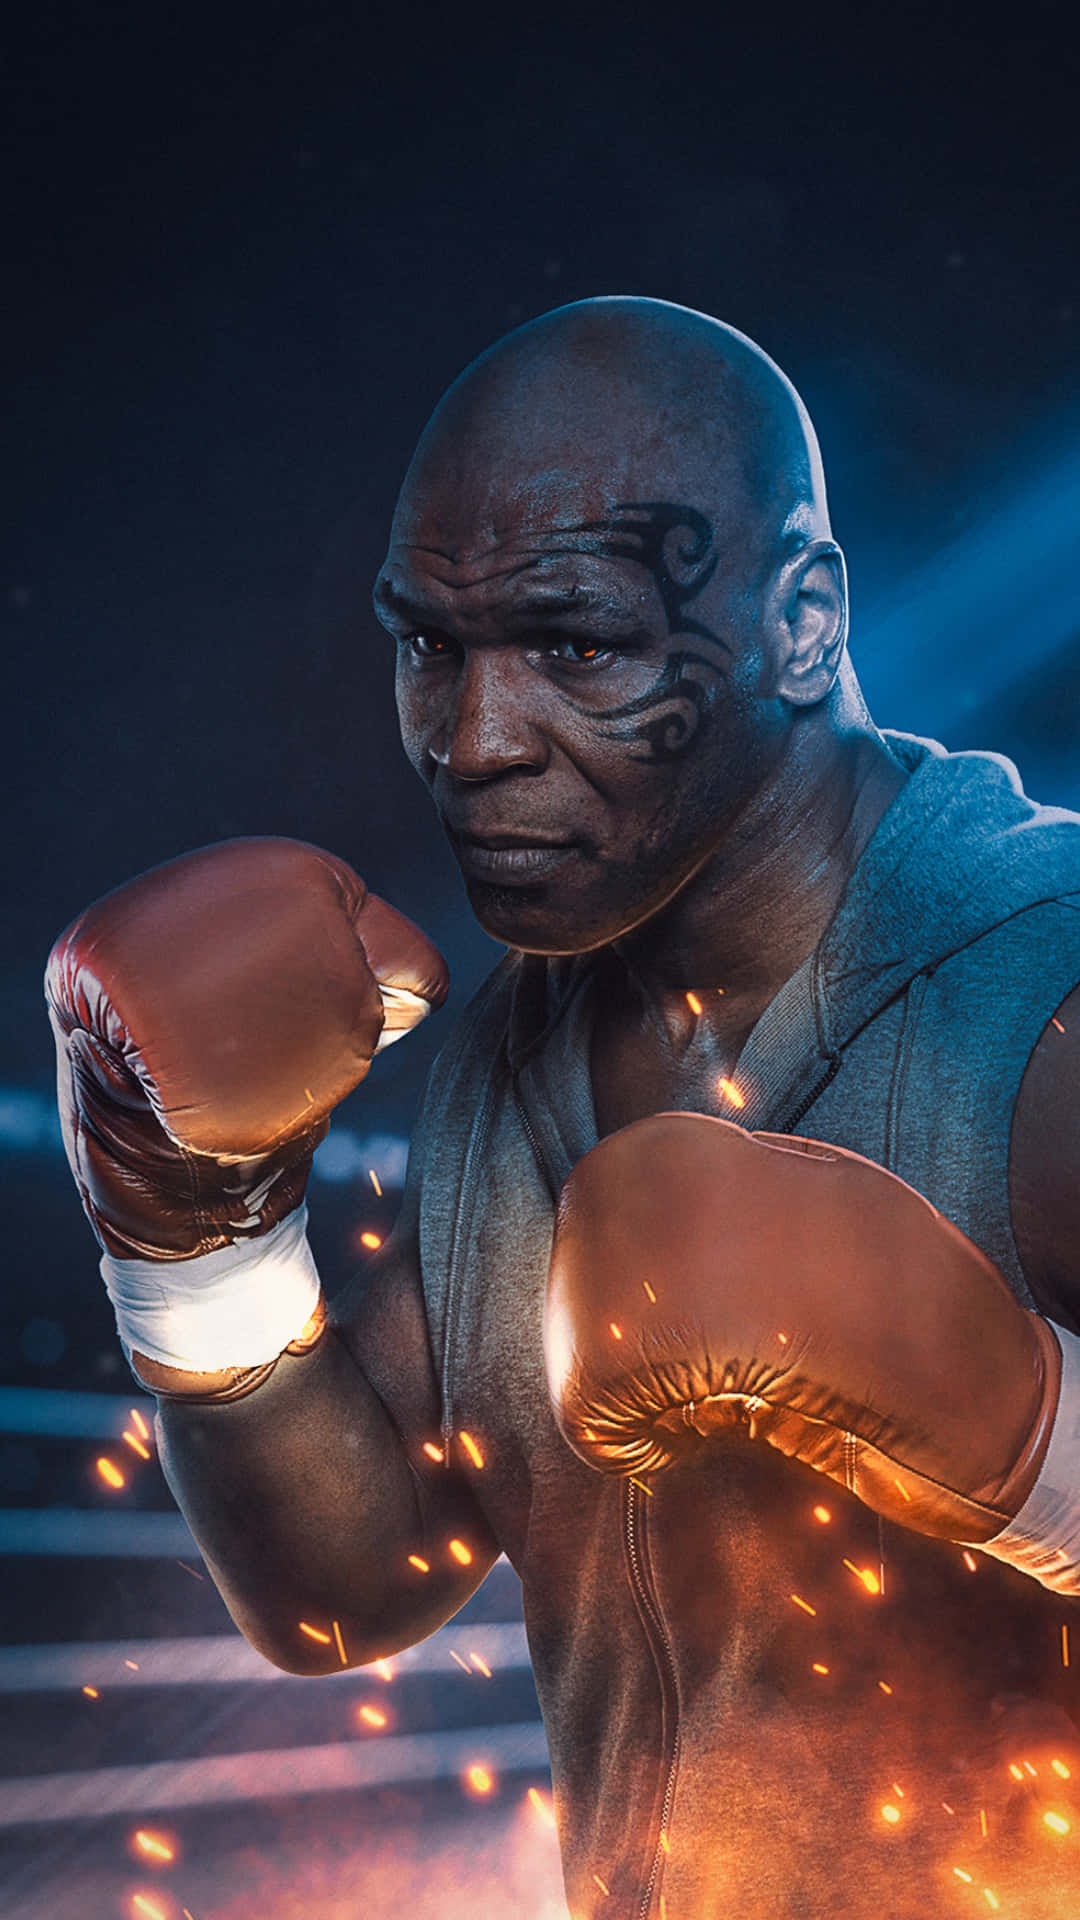 Legendary boxer Mike Tyson posing with a fierce look in the ring